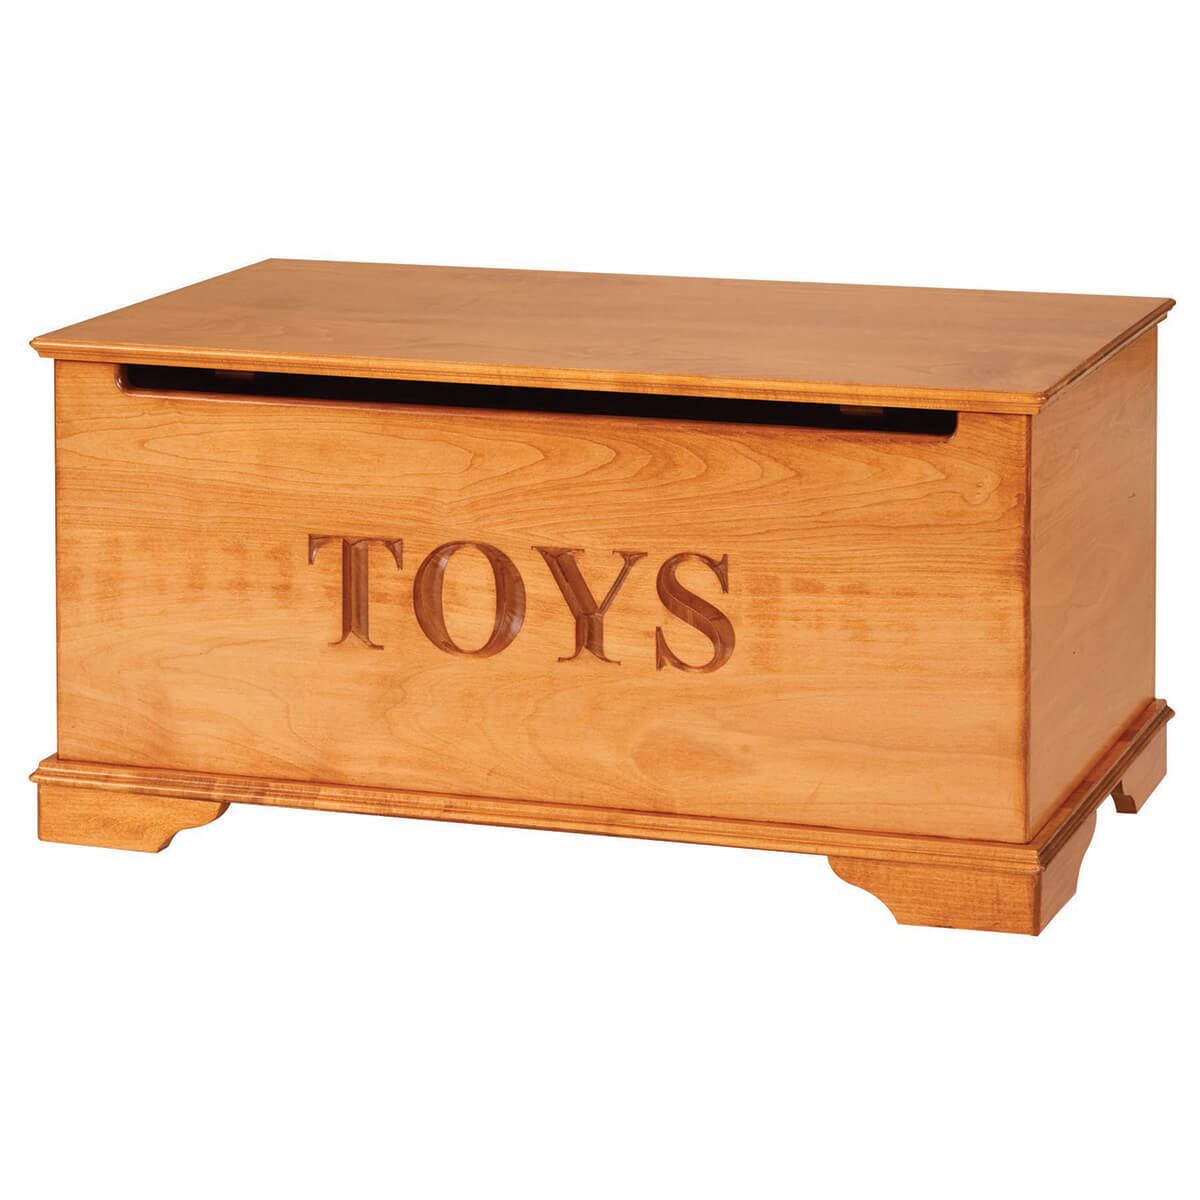 Read more about the article Small Maple Toy Chest with TOYS engraved